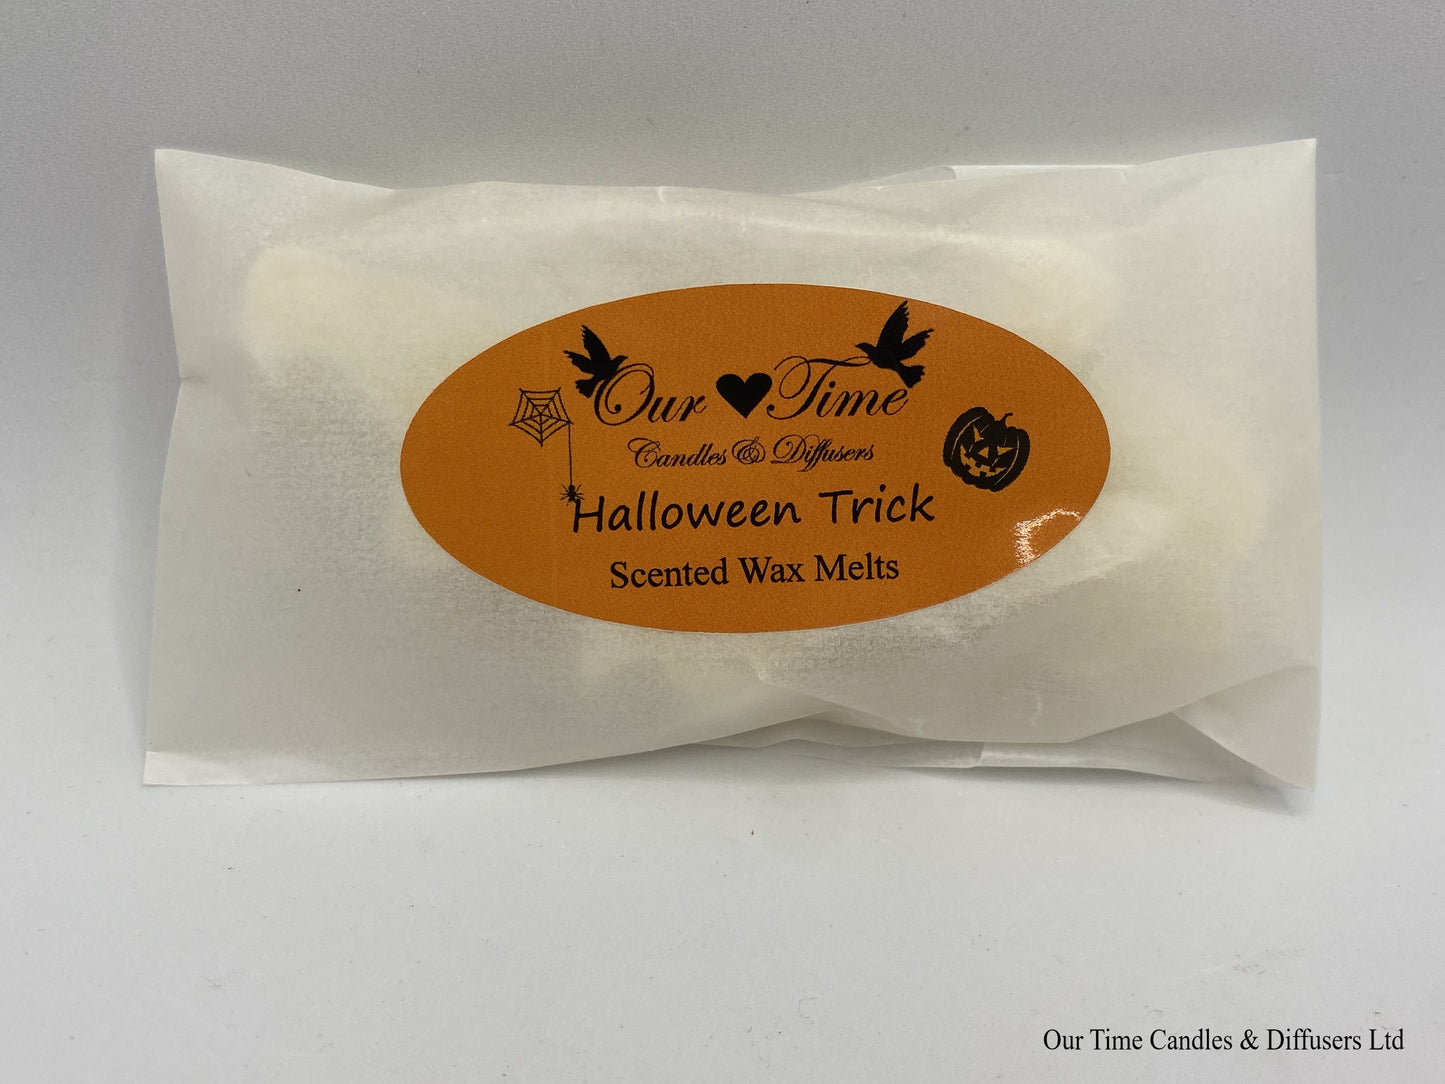 Halloween Trick scented wax melts